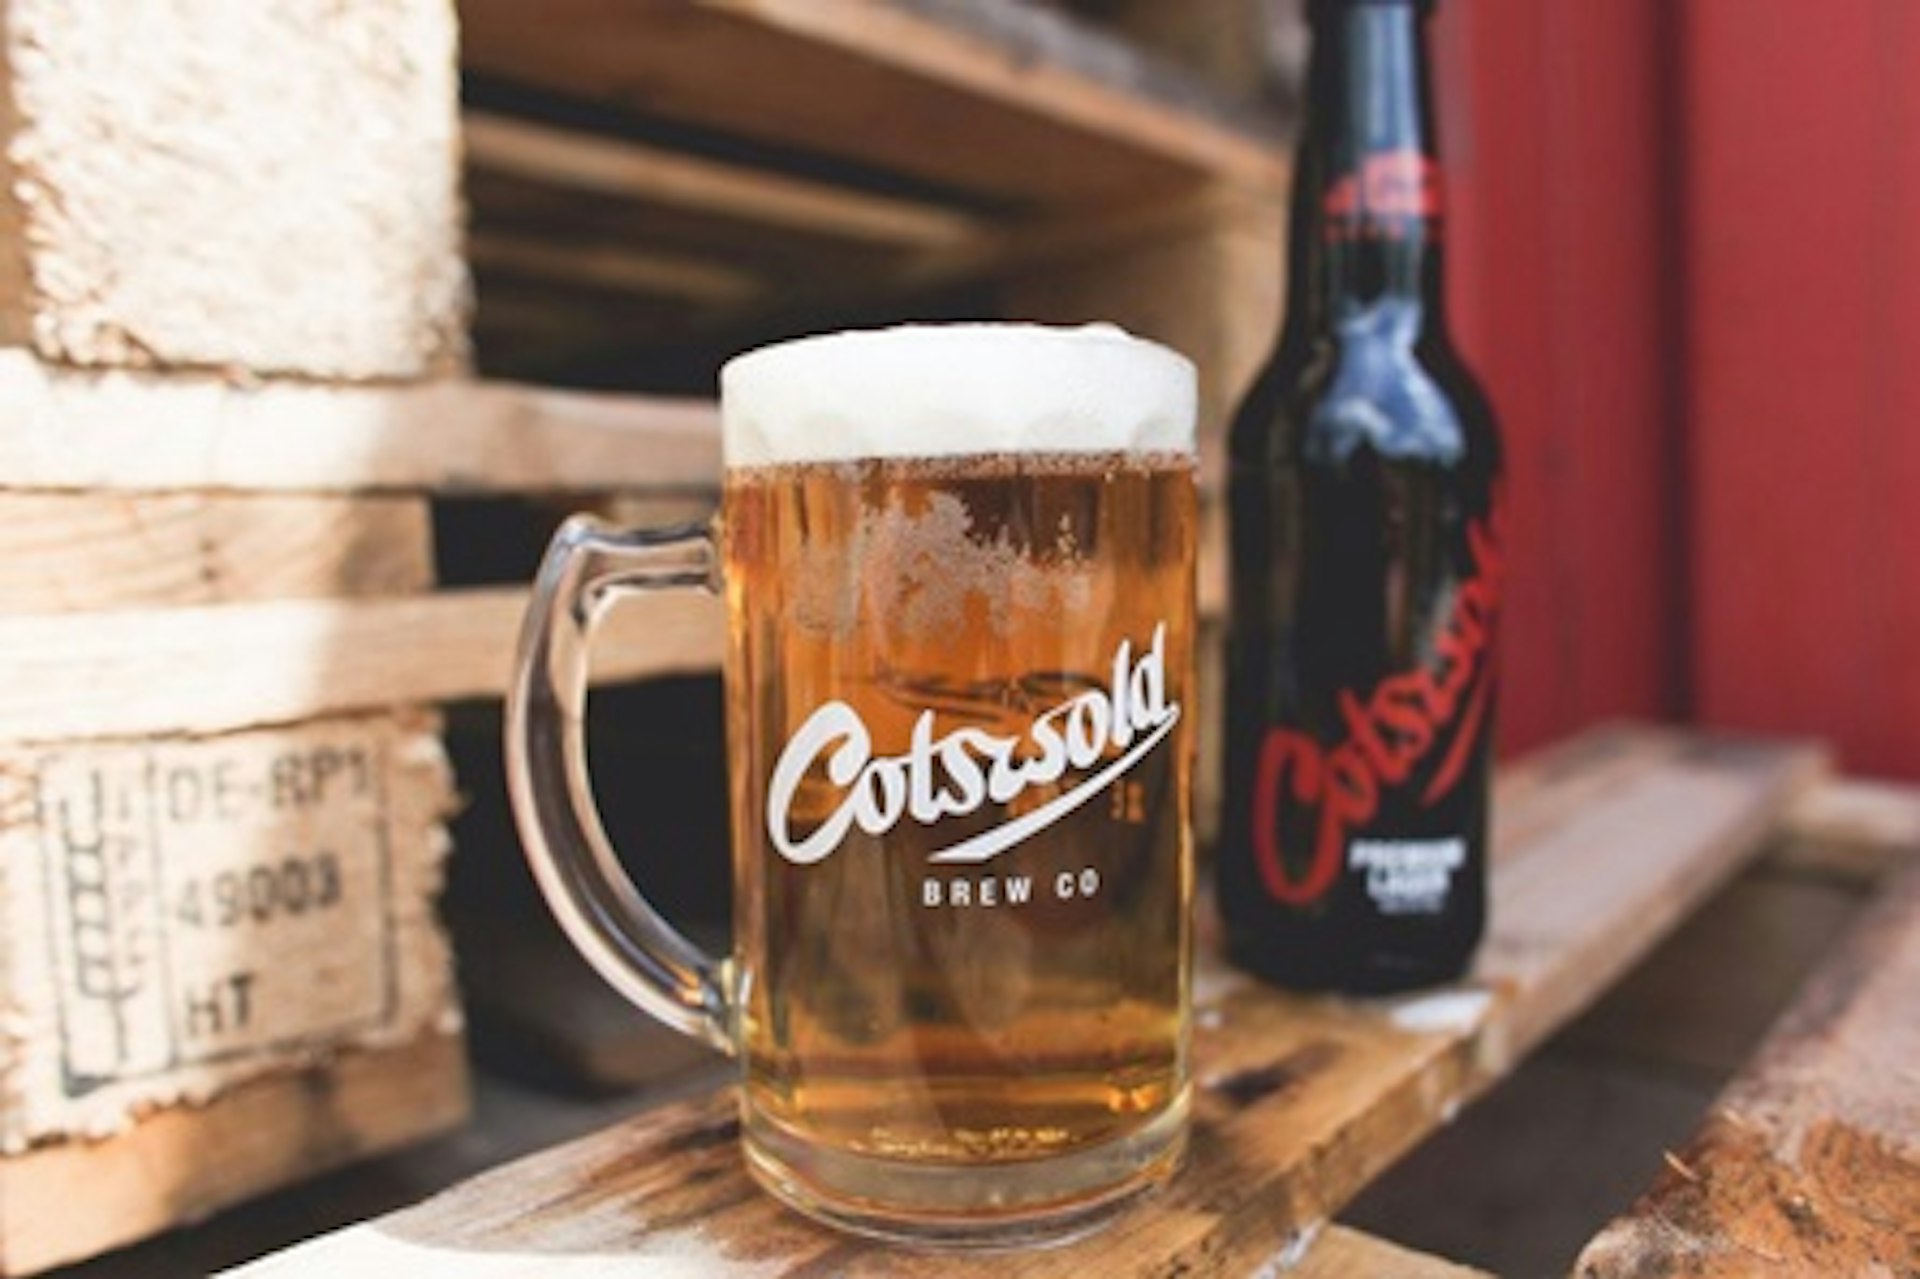 Brewery Tour with Tastings for Two at The Cotswold Brew Co 2